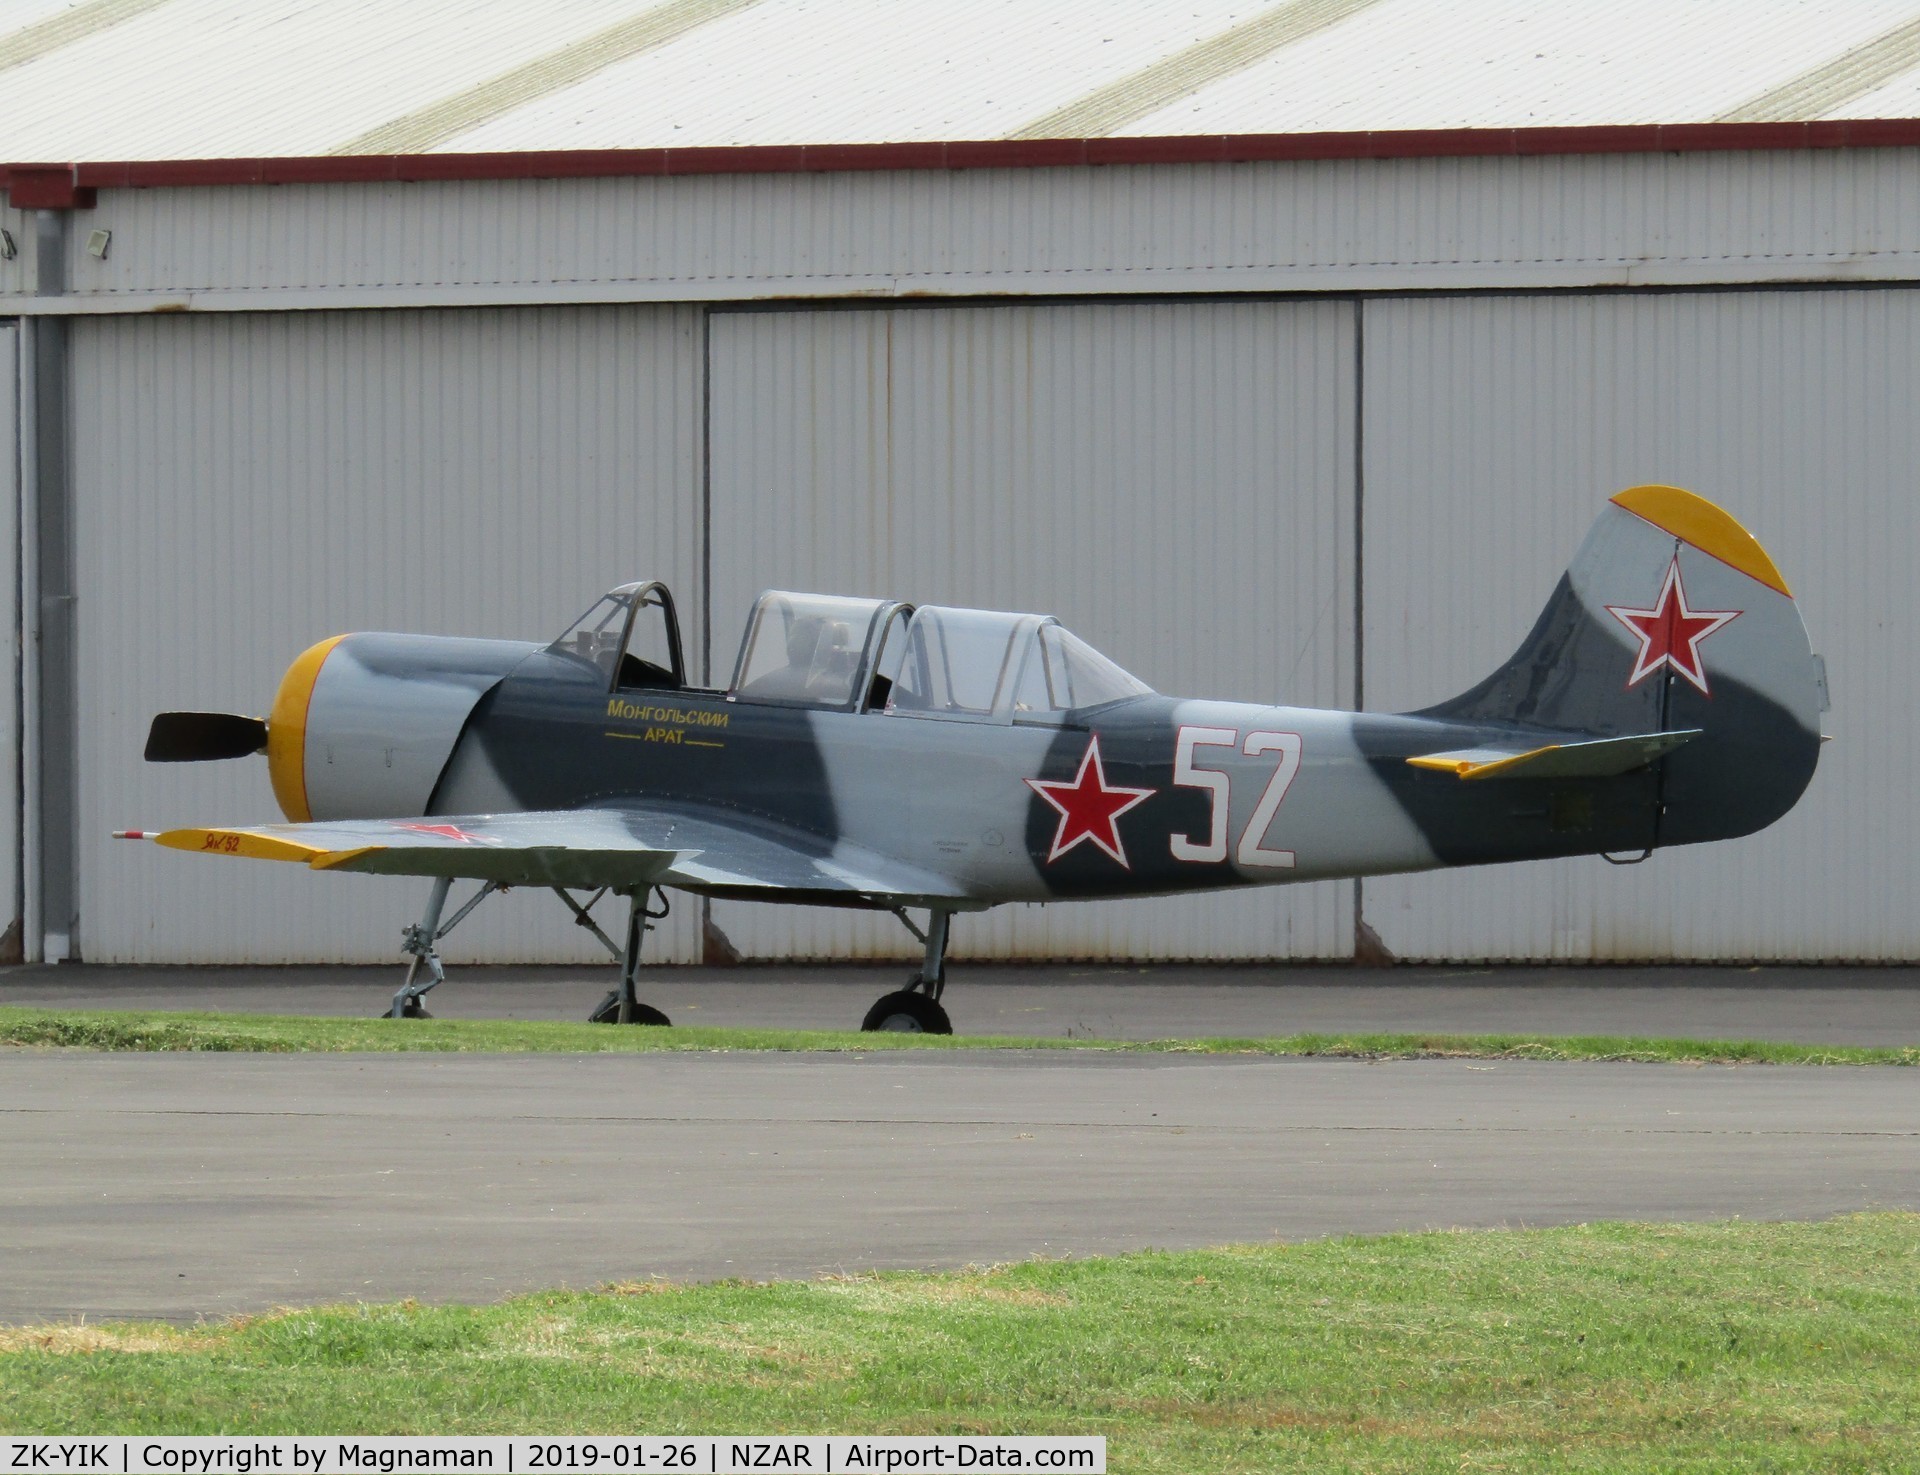 ZK-YIK, 1991 Yakovlev (Aerostar) Yak-52 C/N 9111311, a bunch of these in today - new to me this one